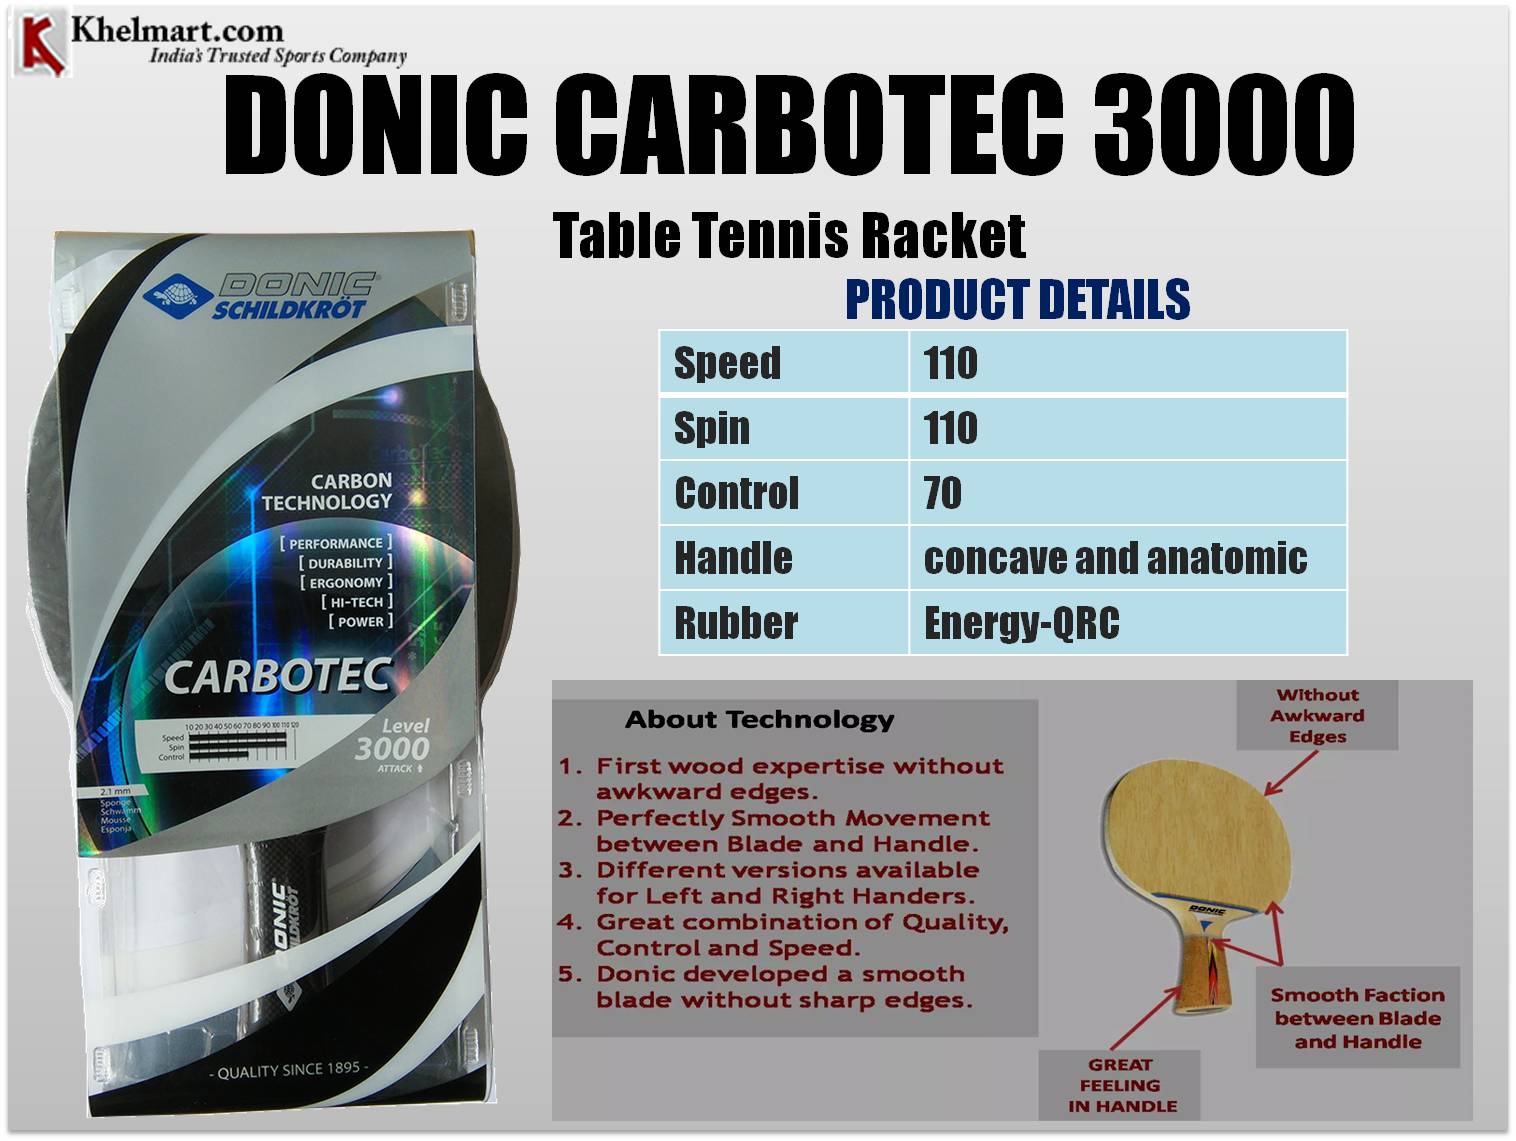 DONIC_CARBOTEC_3000_Table_Tennis_Racket.jpg